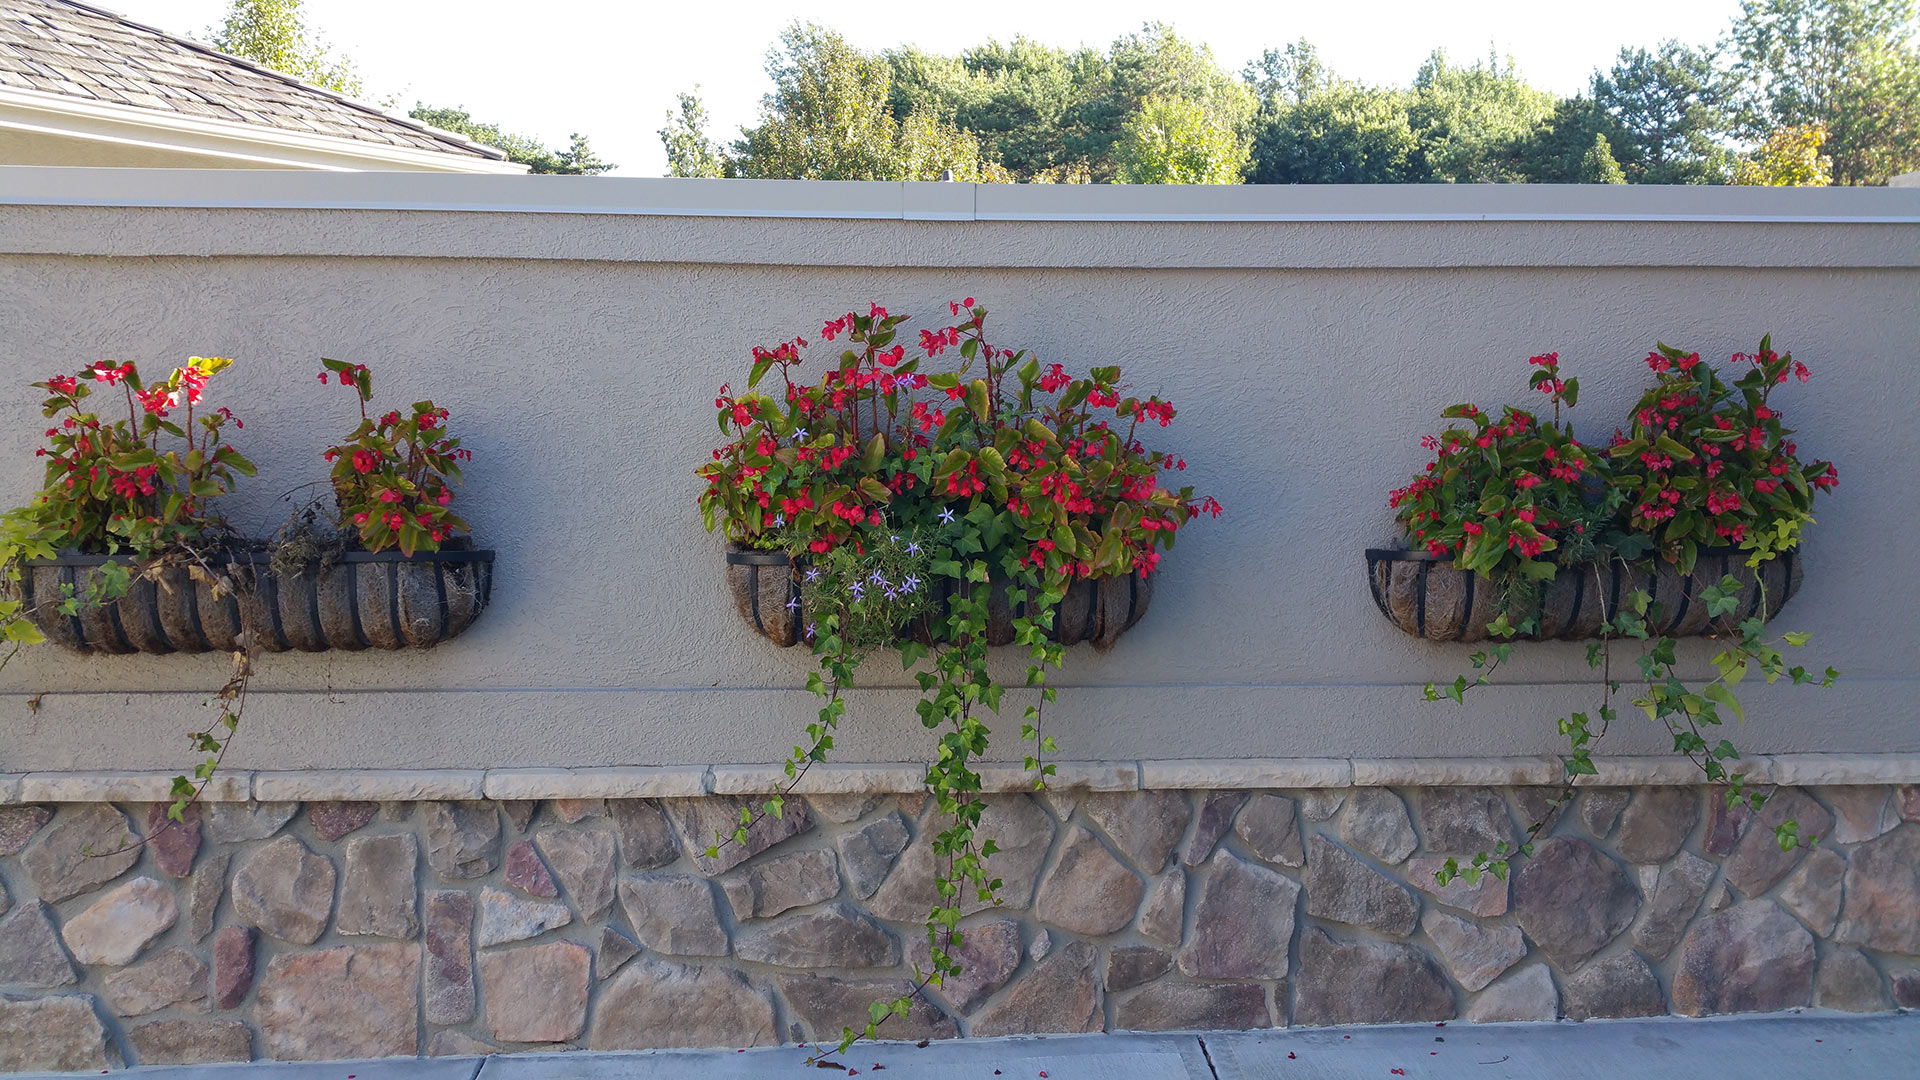 3 wall-hanging planters with red flowers installed by a home in Elkhorn, NE. 